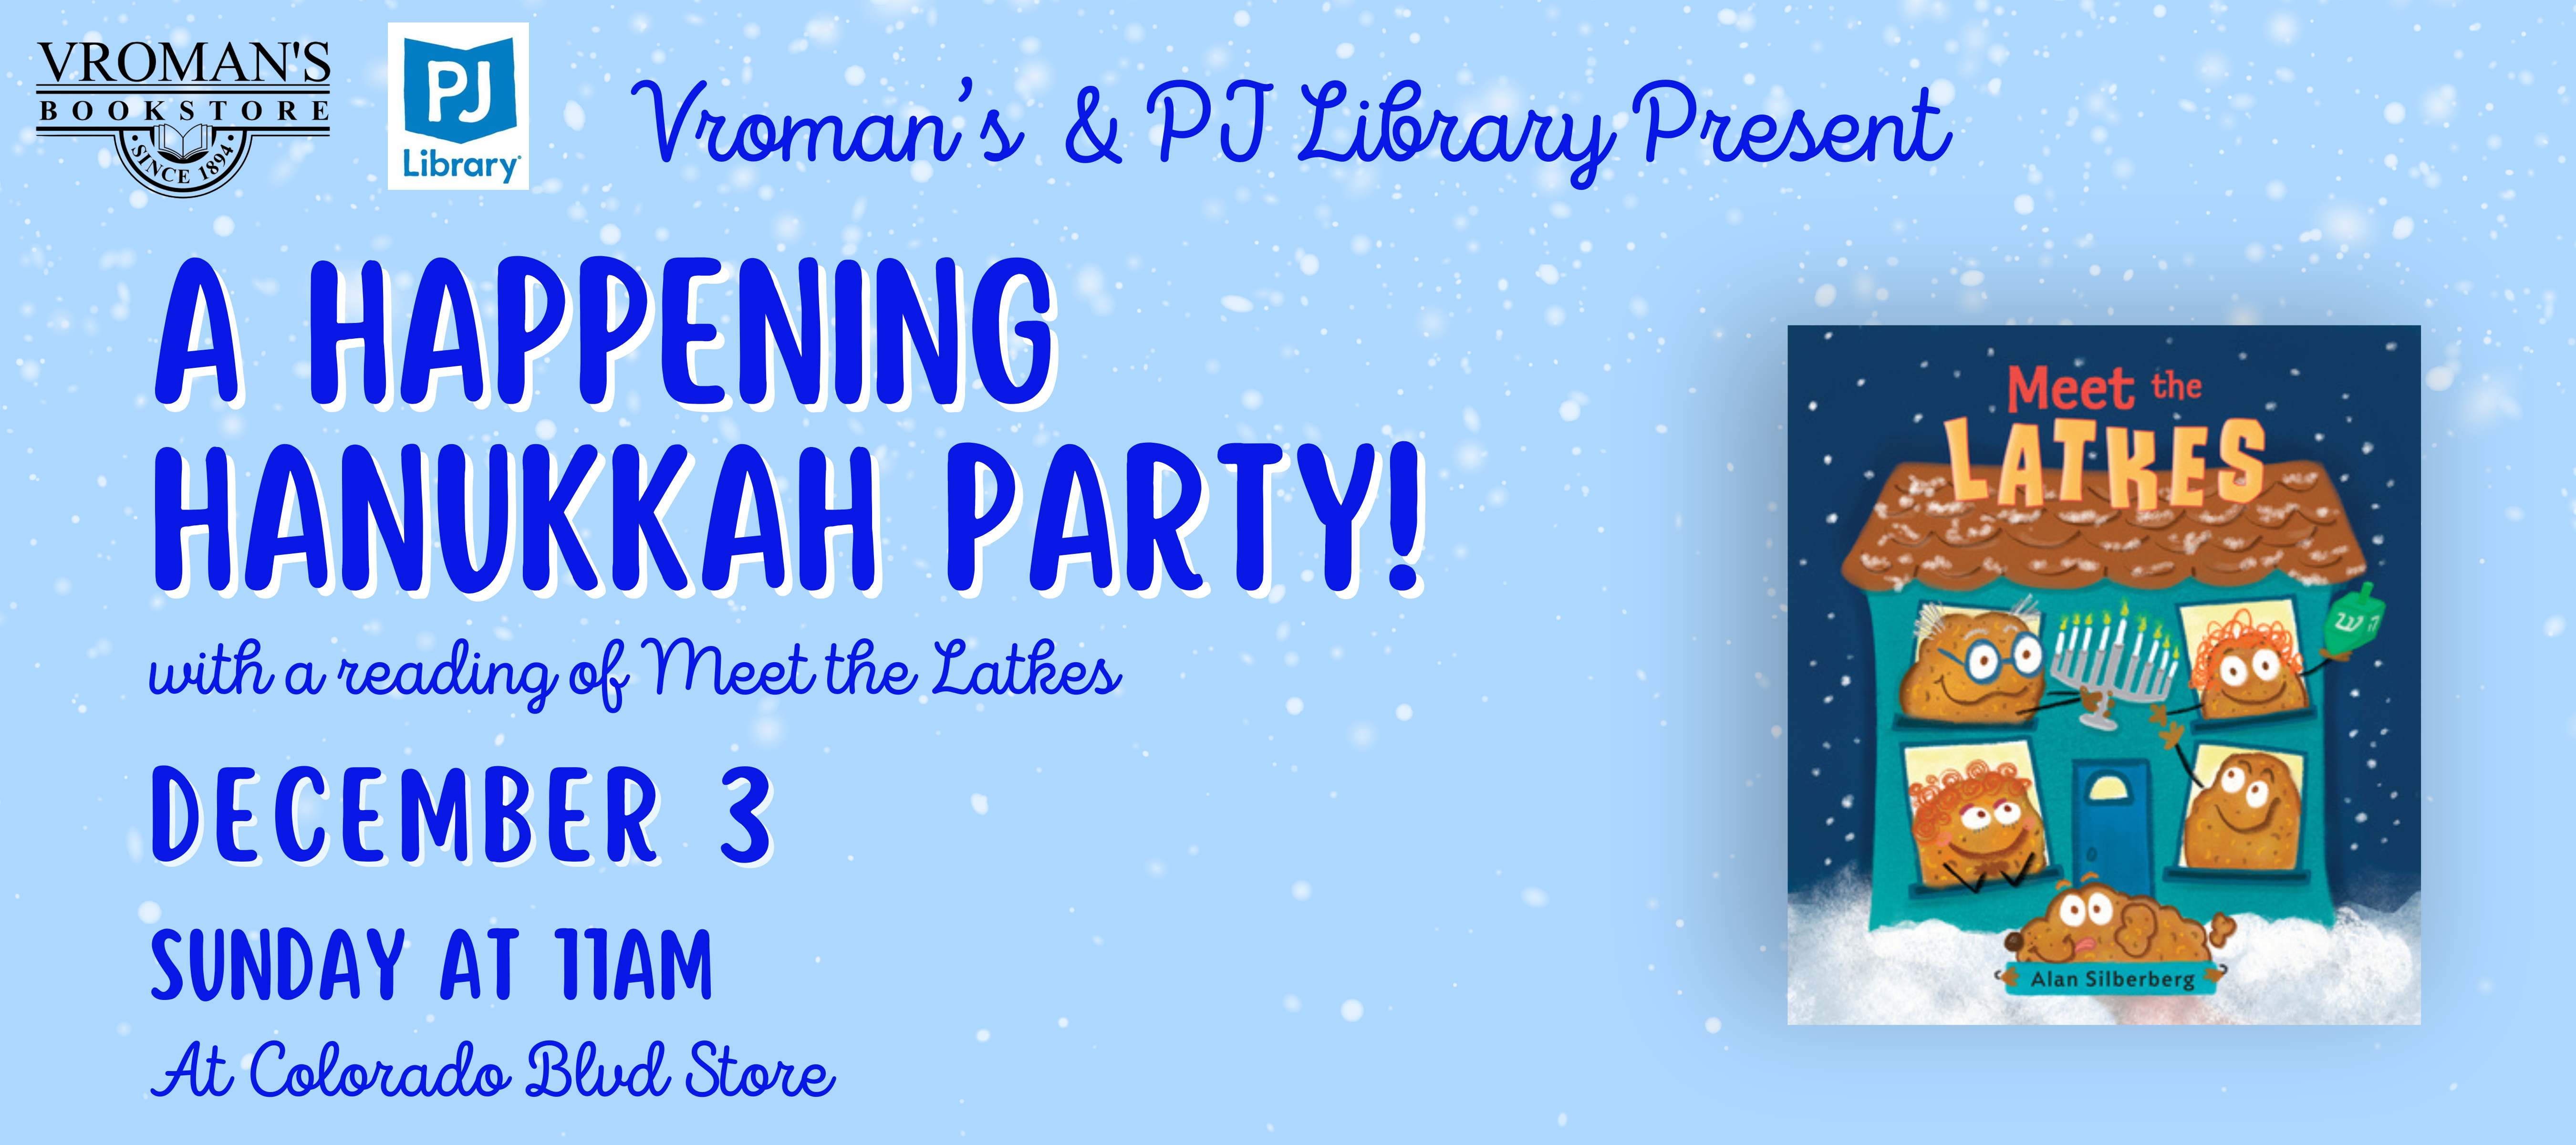 Flyer promoting Hanukkah party at Vroman's Bookstore on December 3, 2023